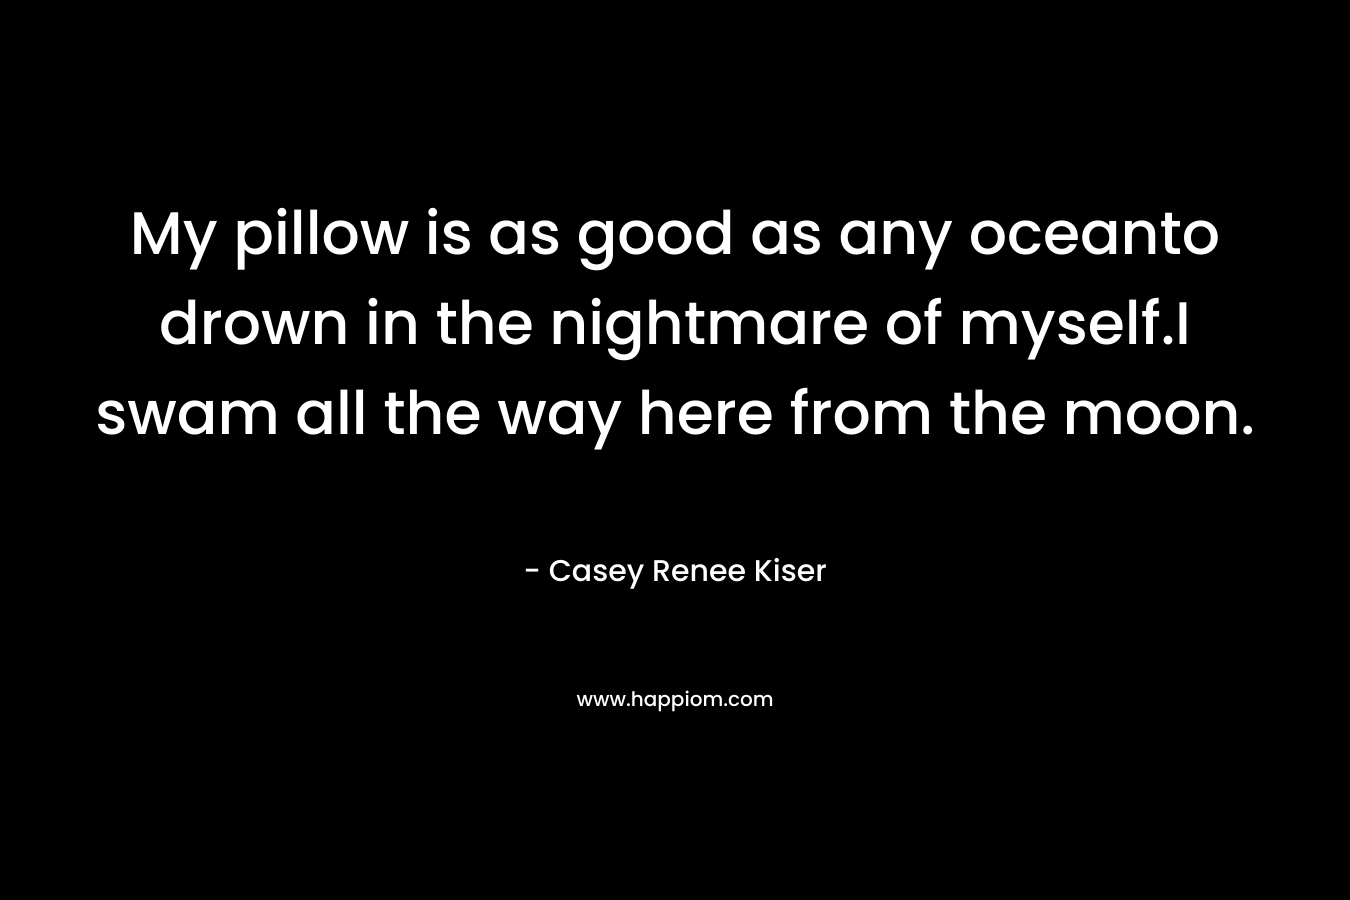 My pillow is as good as any oceanto drown in the nightmare of myself.I swam all the way here from the moon. – Casey Renee Kiser